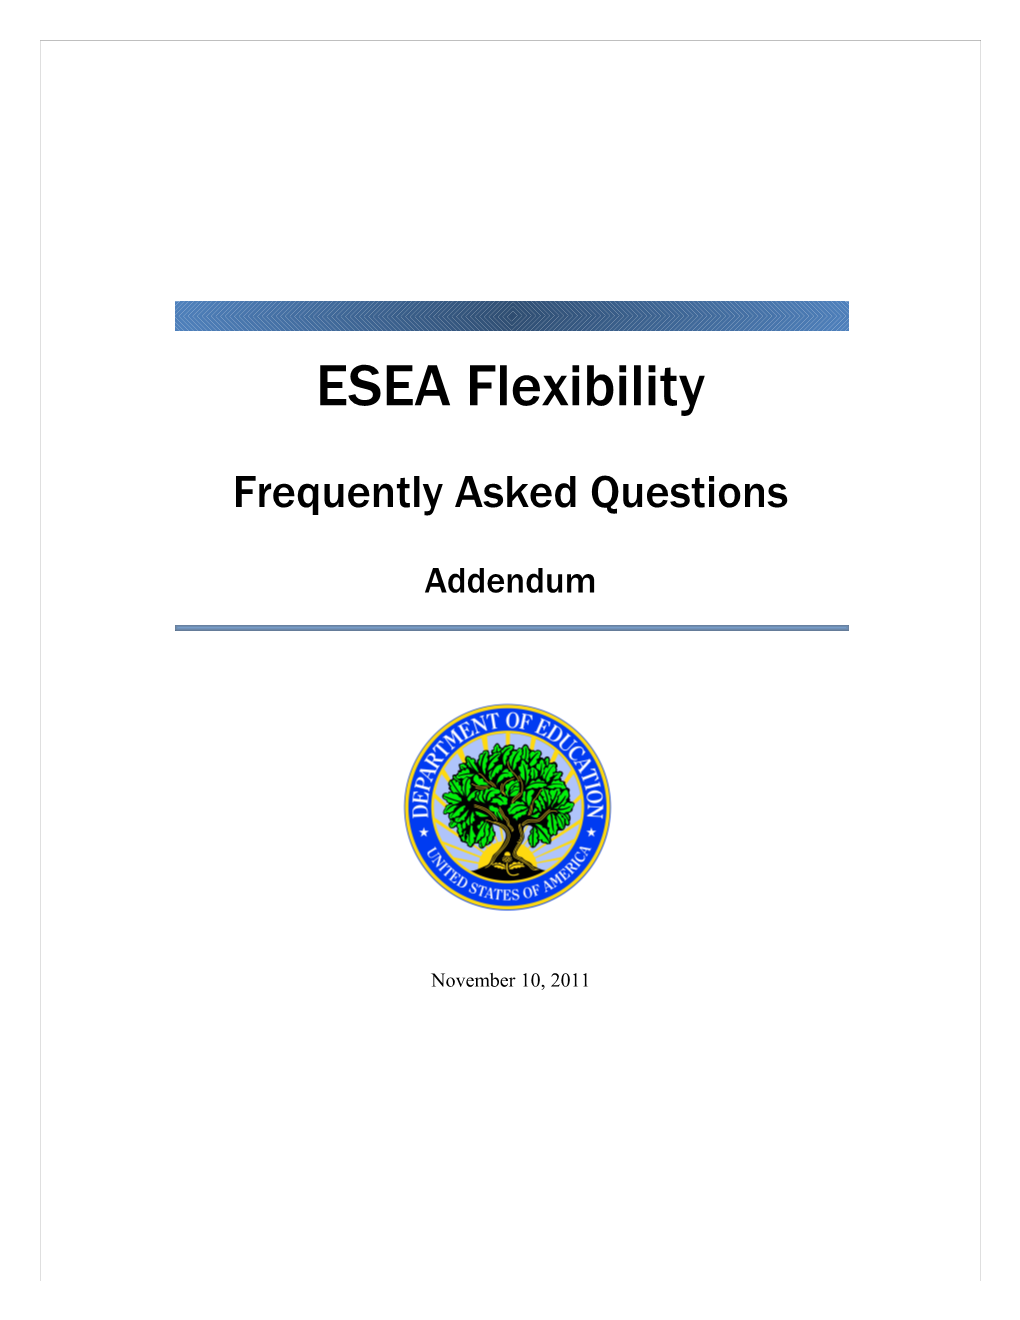 ESEA Flexibility: Addendum to Frequently Asked Questions November 10, 2011 (MS Word)